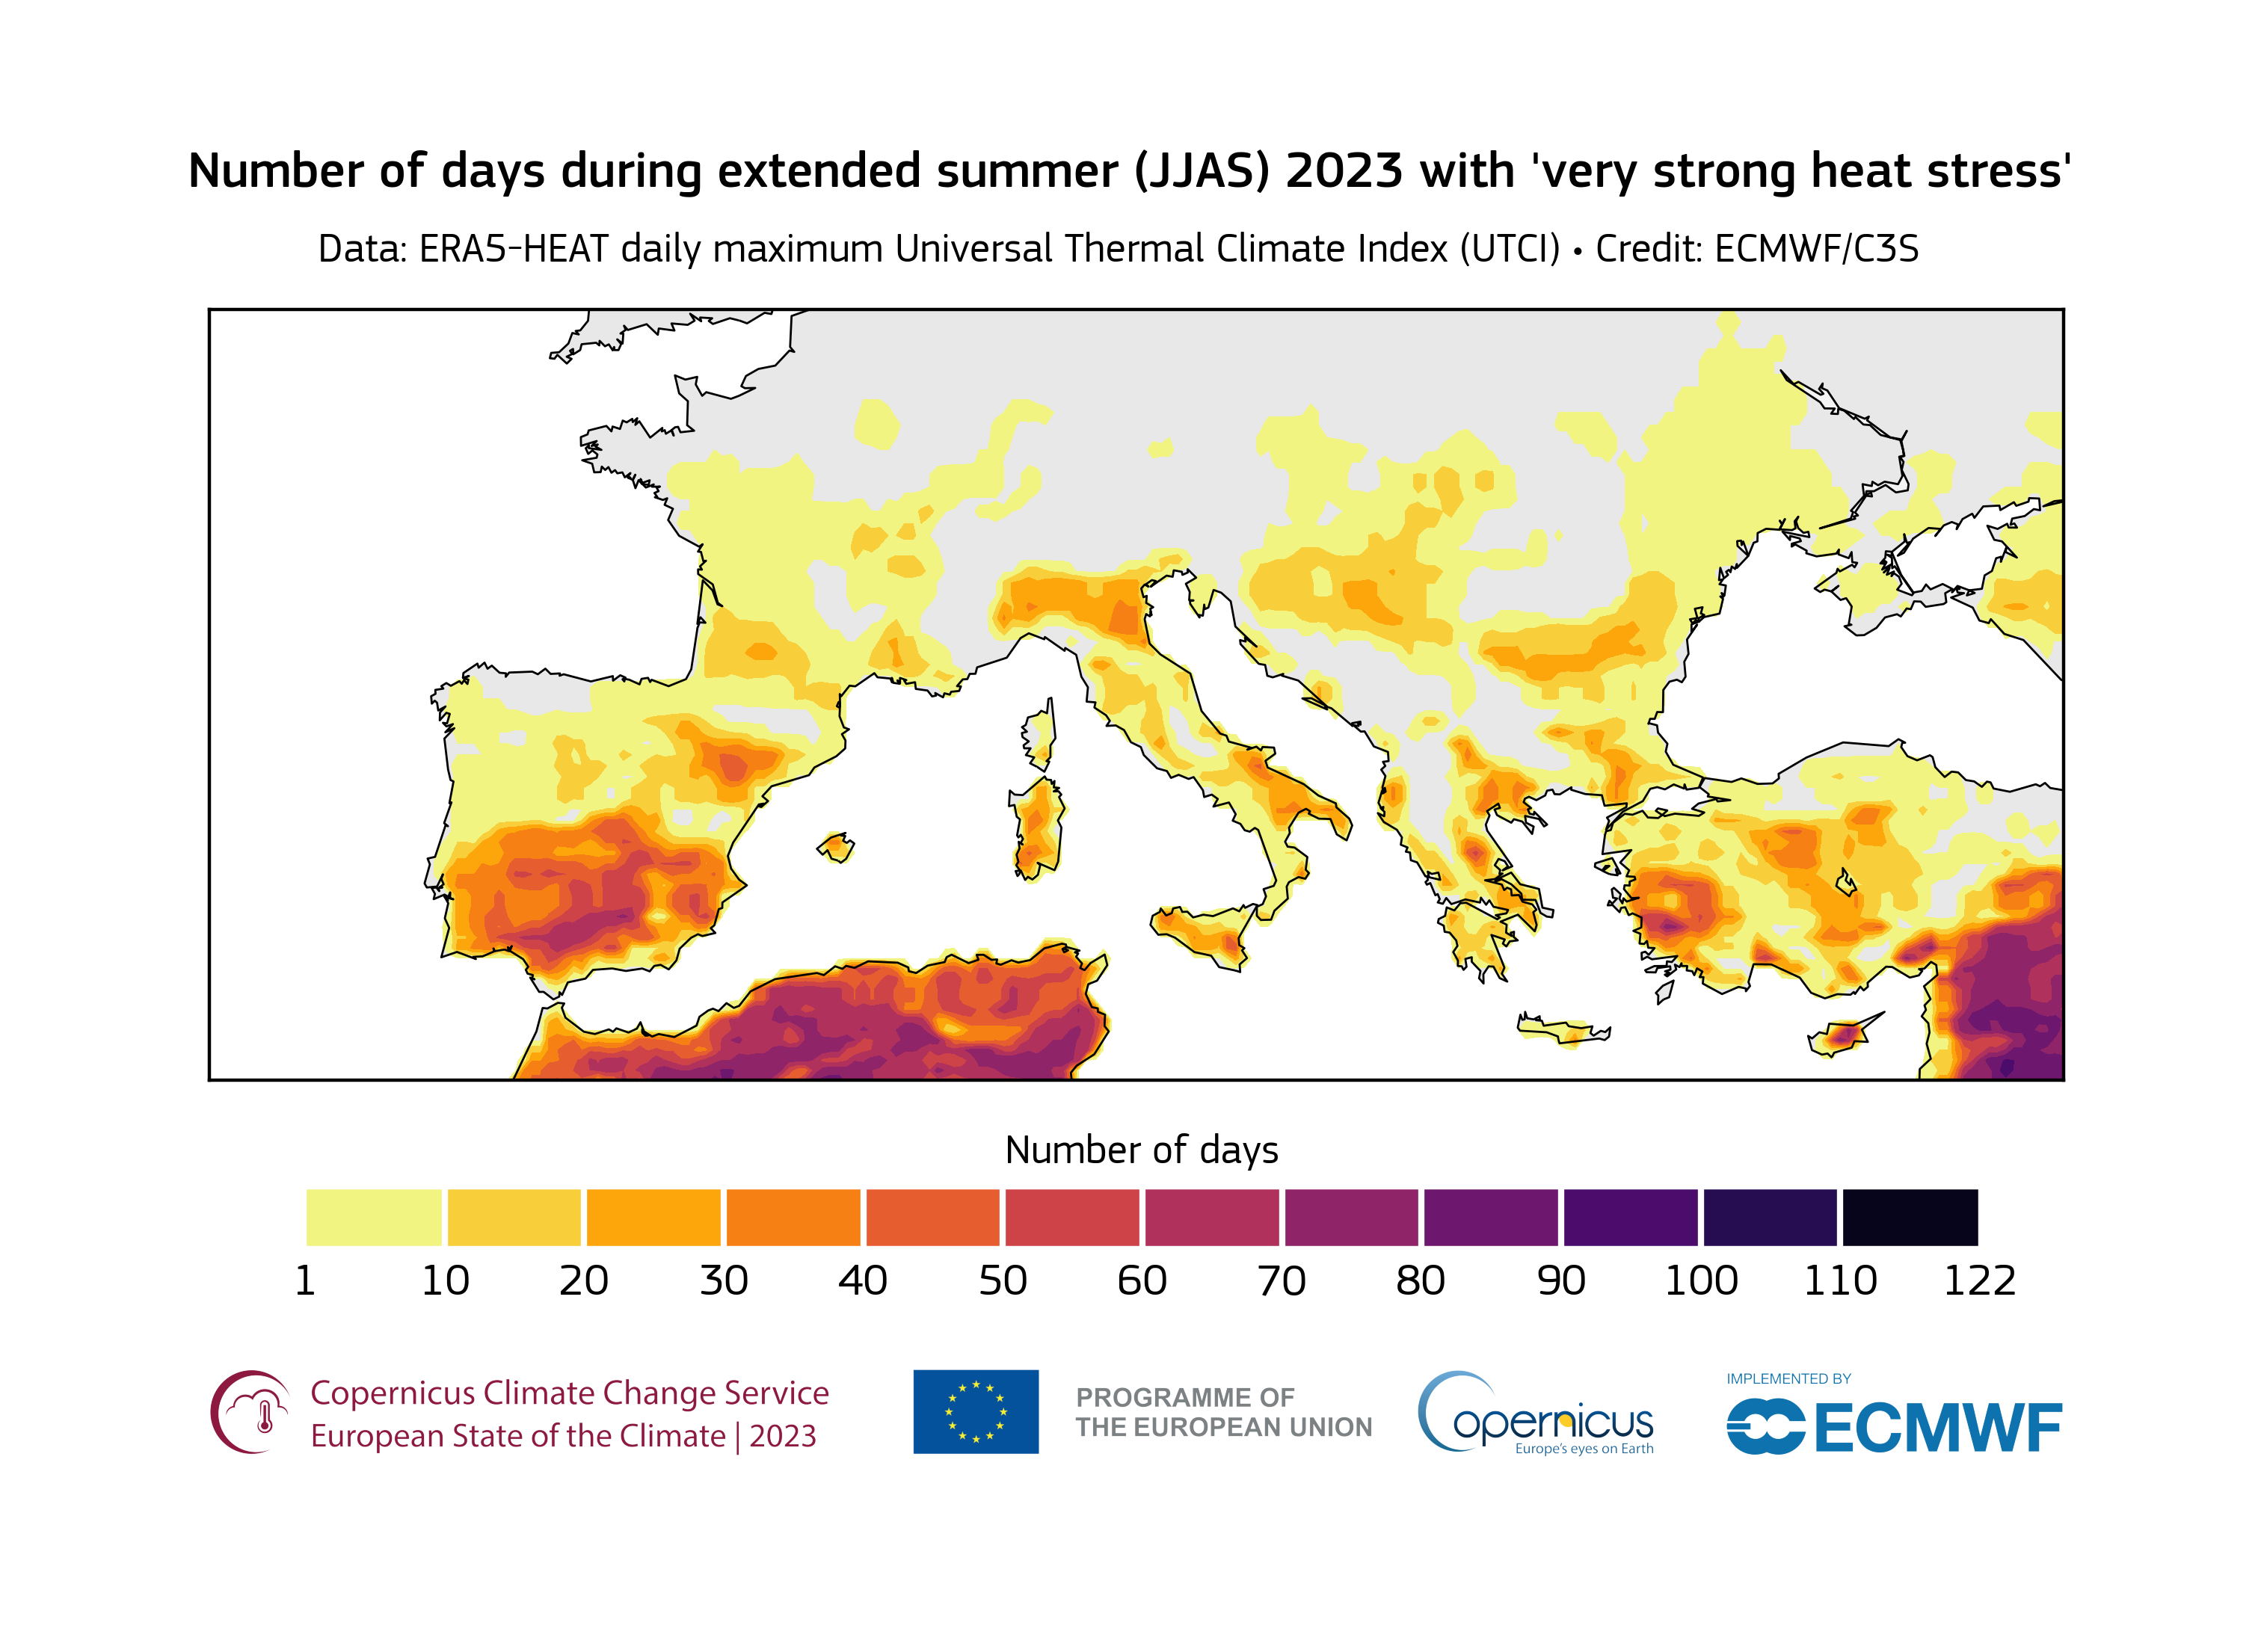 Number of days during summer 2023 with very strong heat stress